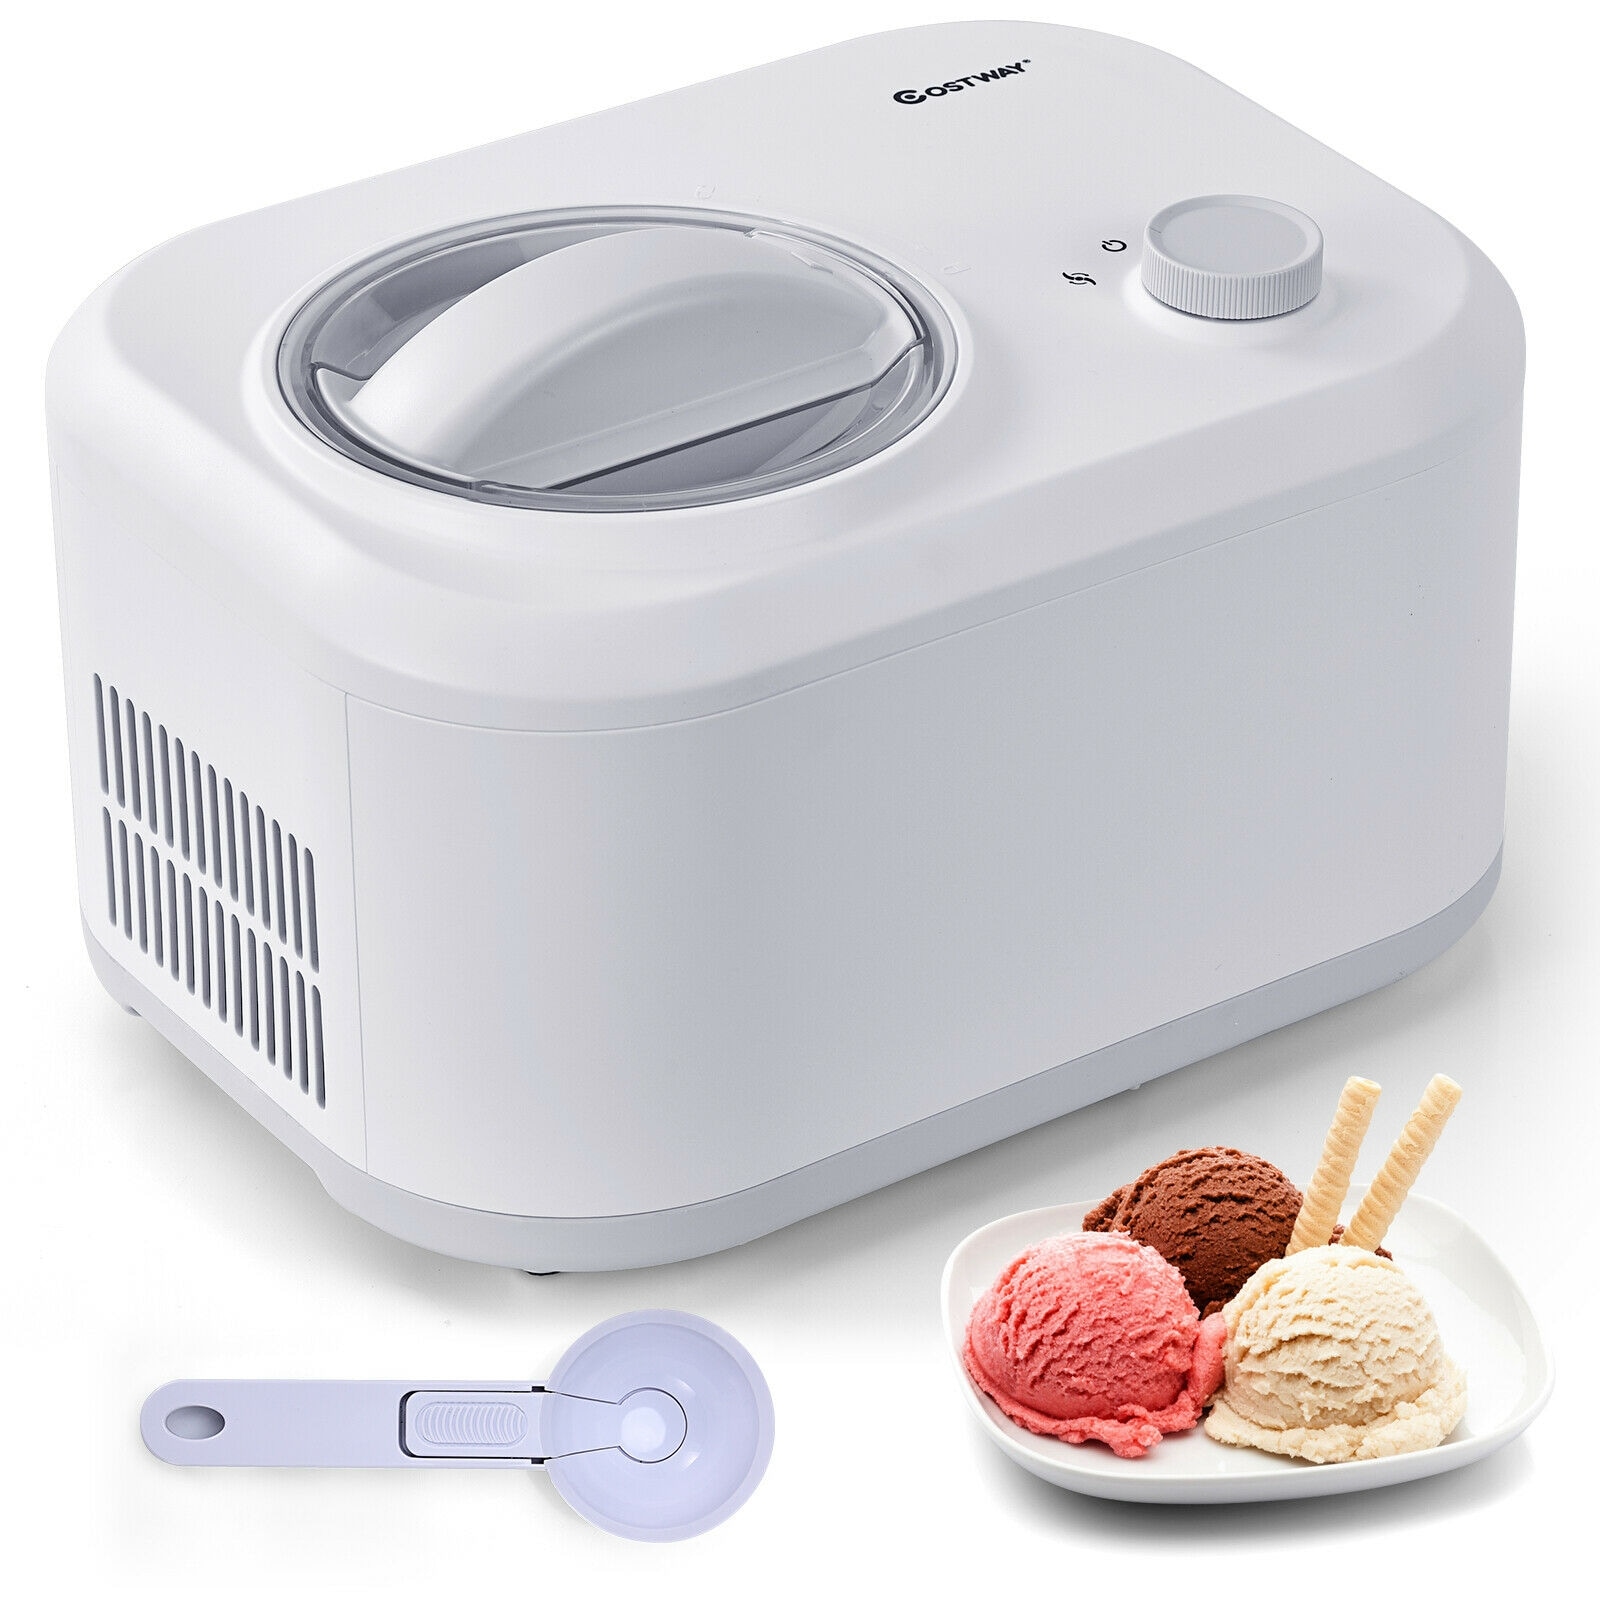 CASAINC 1.1 Ice Cream Maker Automatic Frozen Dessert Machine with Spoon,Green in the Ice Cream department at Lowes.com